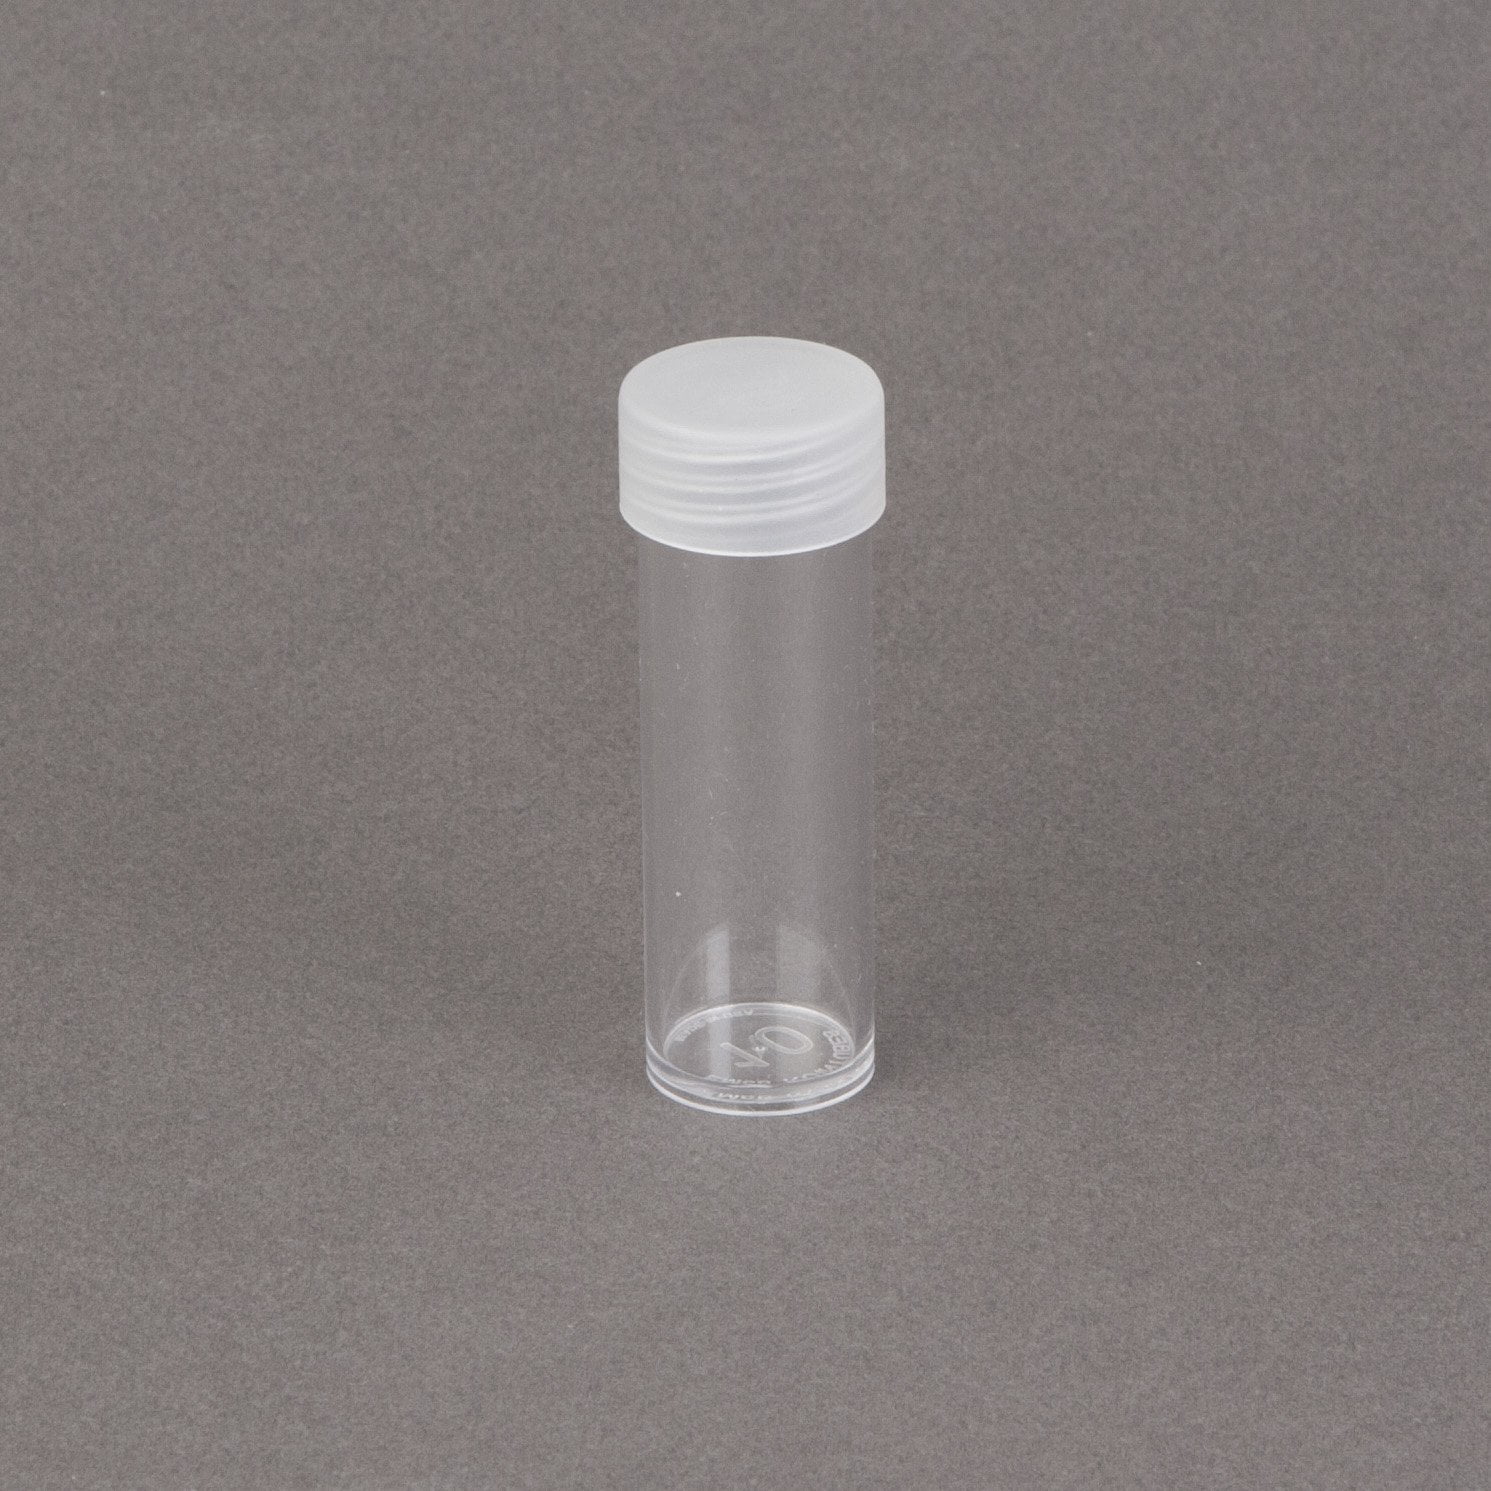 Individual NEW Round Ultra Clear PREMIUM Plastic QUARTER Coin Tubes with Screw On Caps by Max Pro Coin Supplies 100 